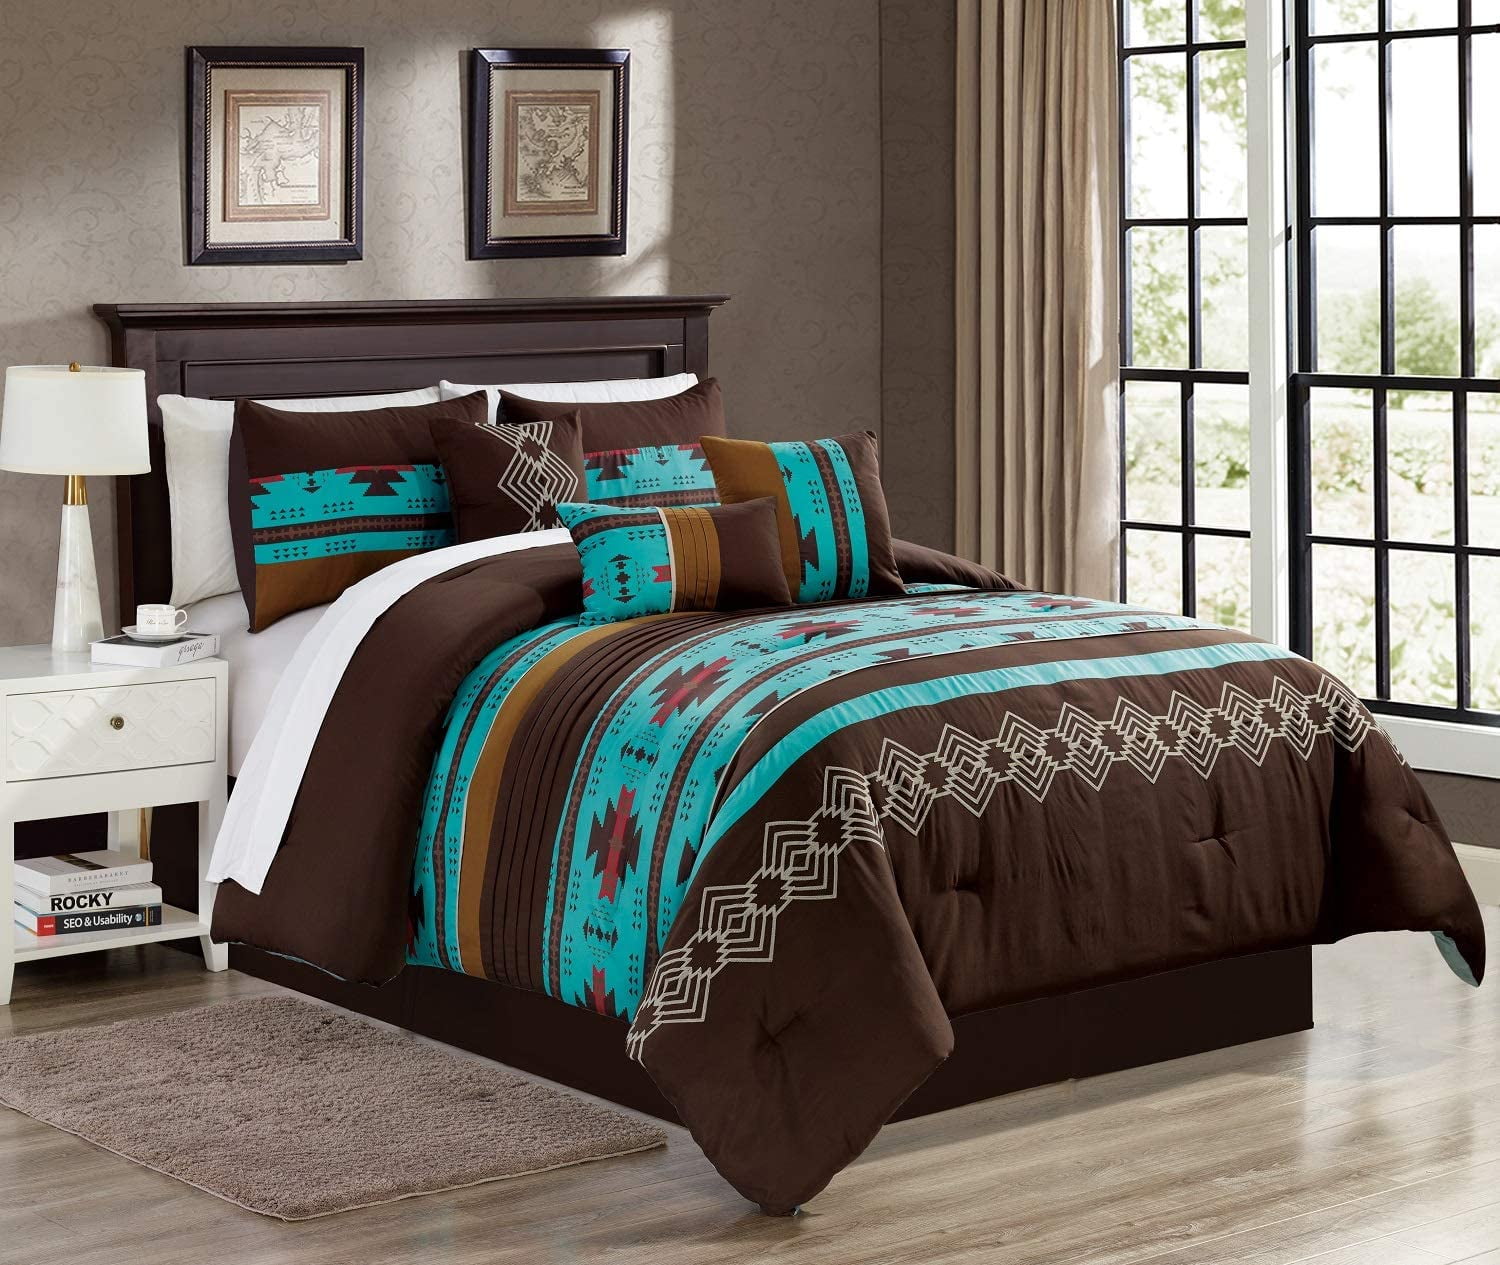 Makala Navy Blue, King WPM WORLD PRODUCTS MART 7 Piece Western Southwestern Native American Design Comforter Set Multicolor Coffee Brown Embroidered Size Bed in a Bag Navajo Bedding Set 